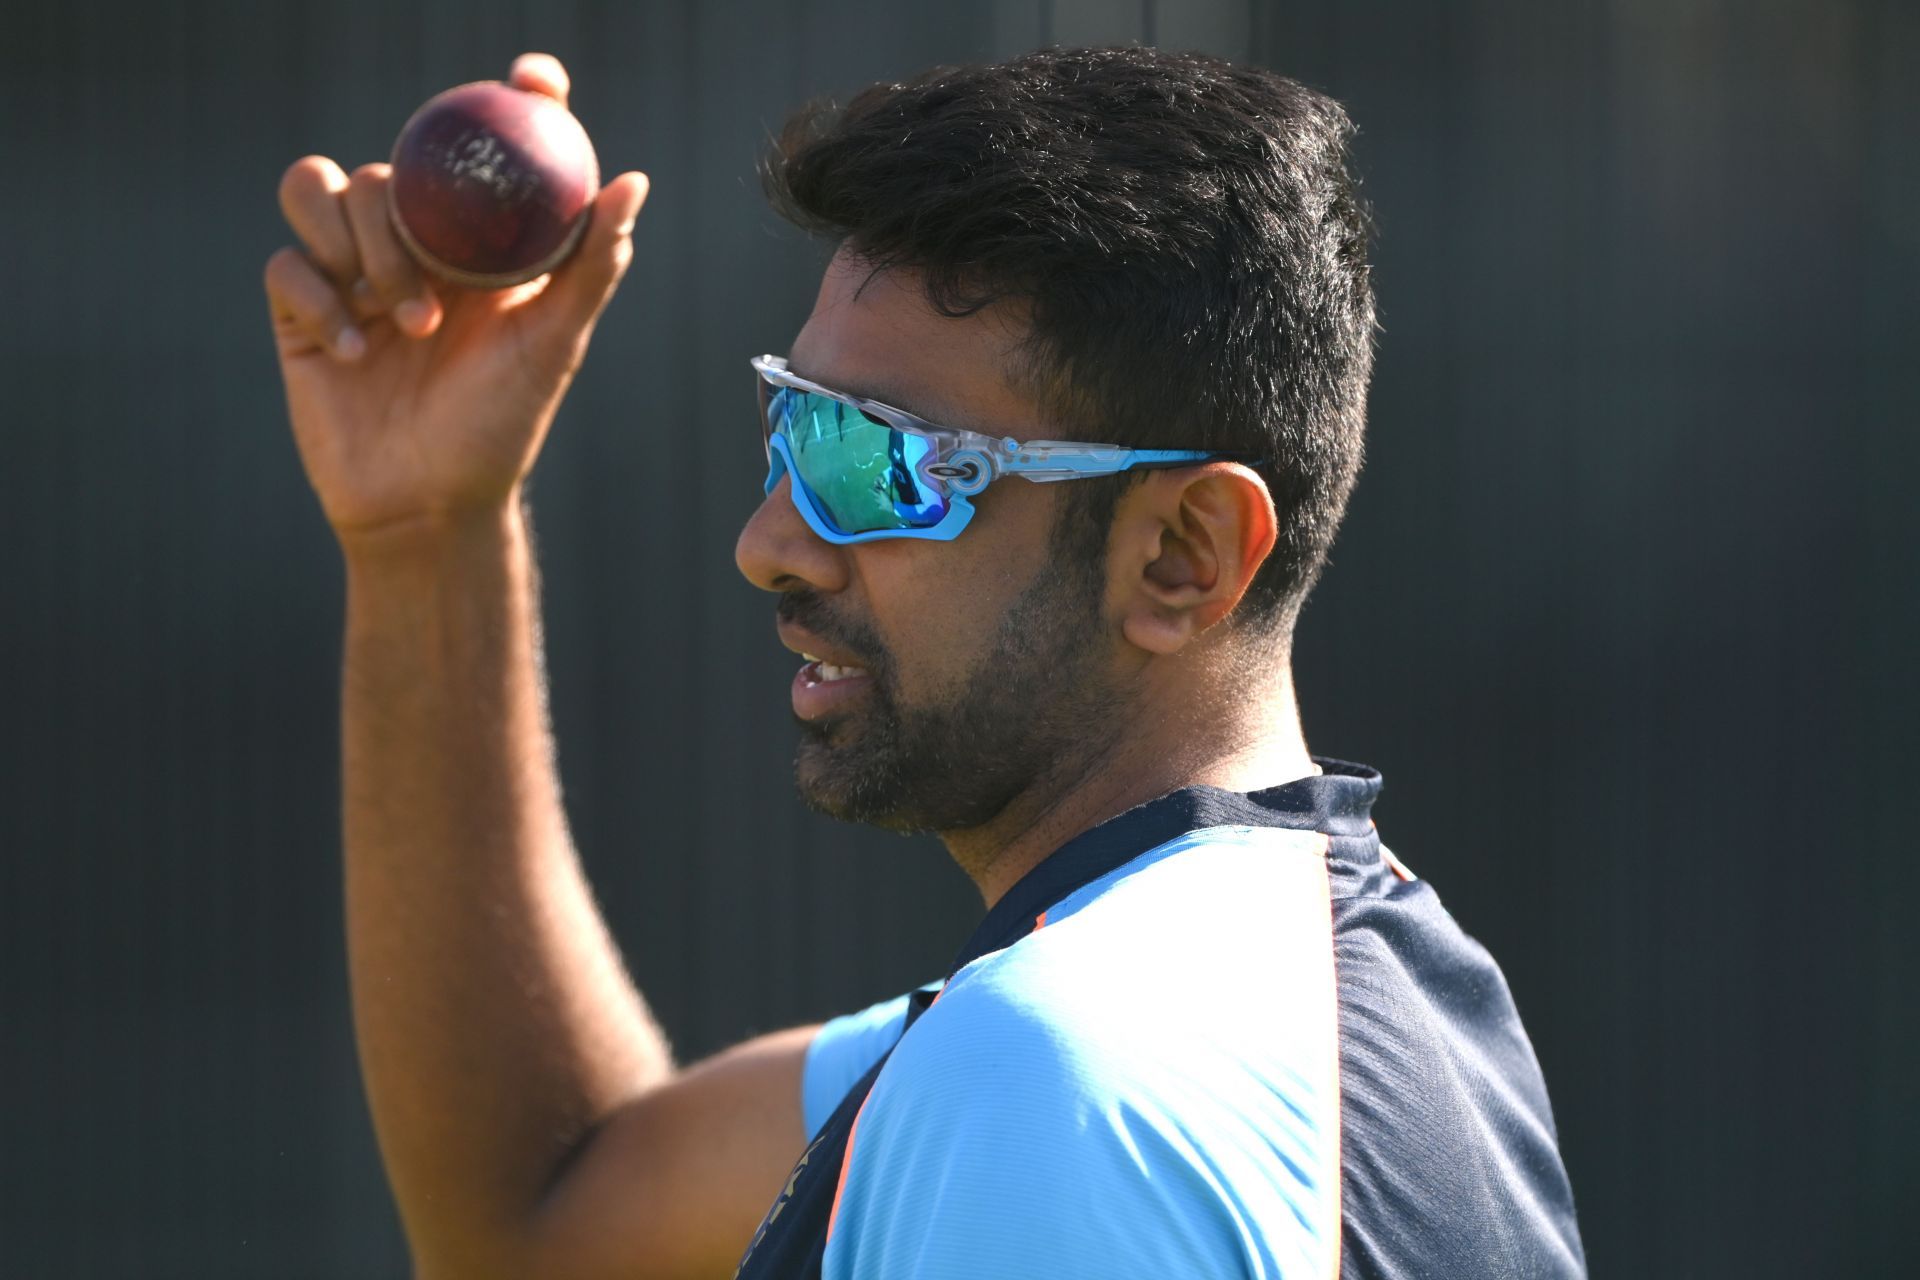 R Ashwin has picked up more than 300 Test wickets on Indian soil